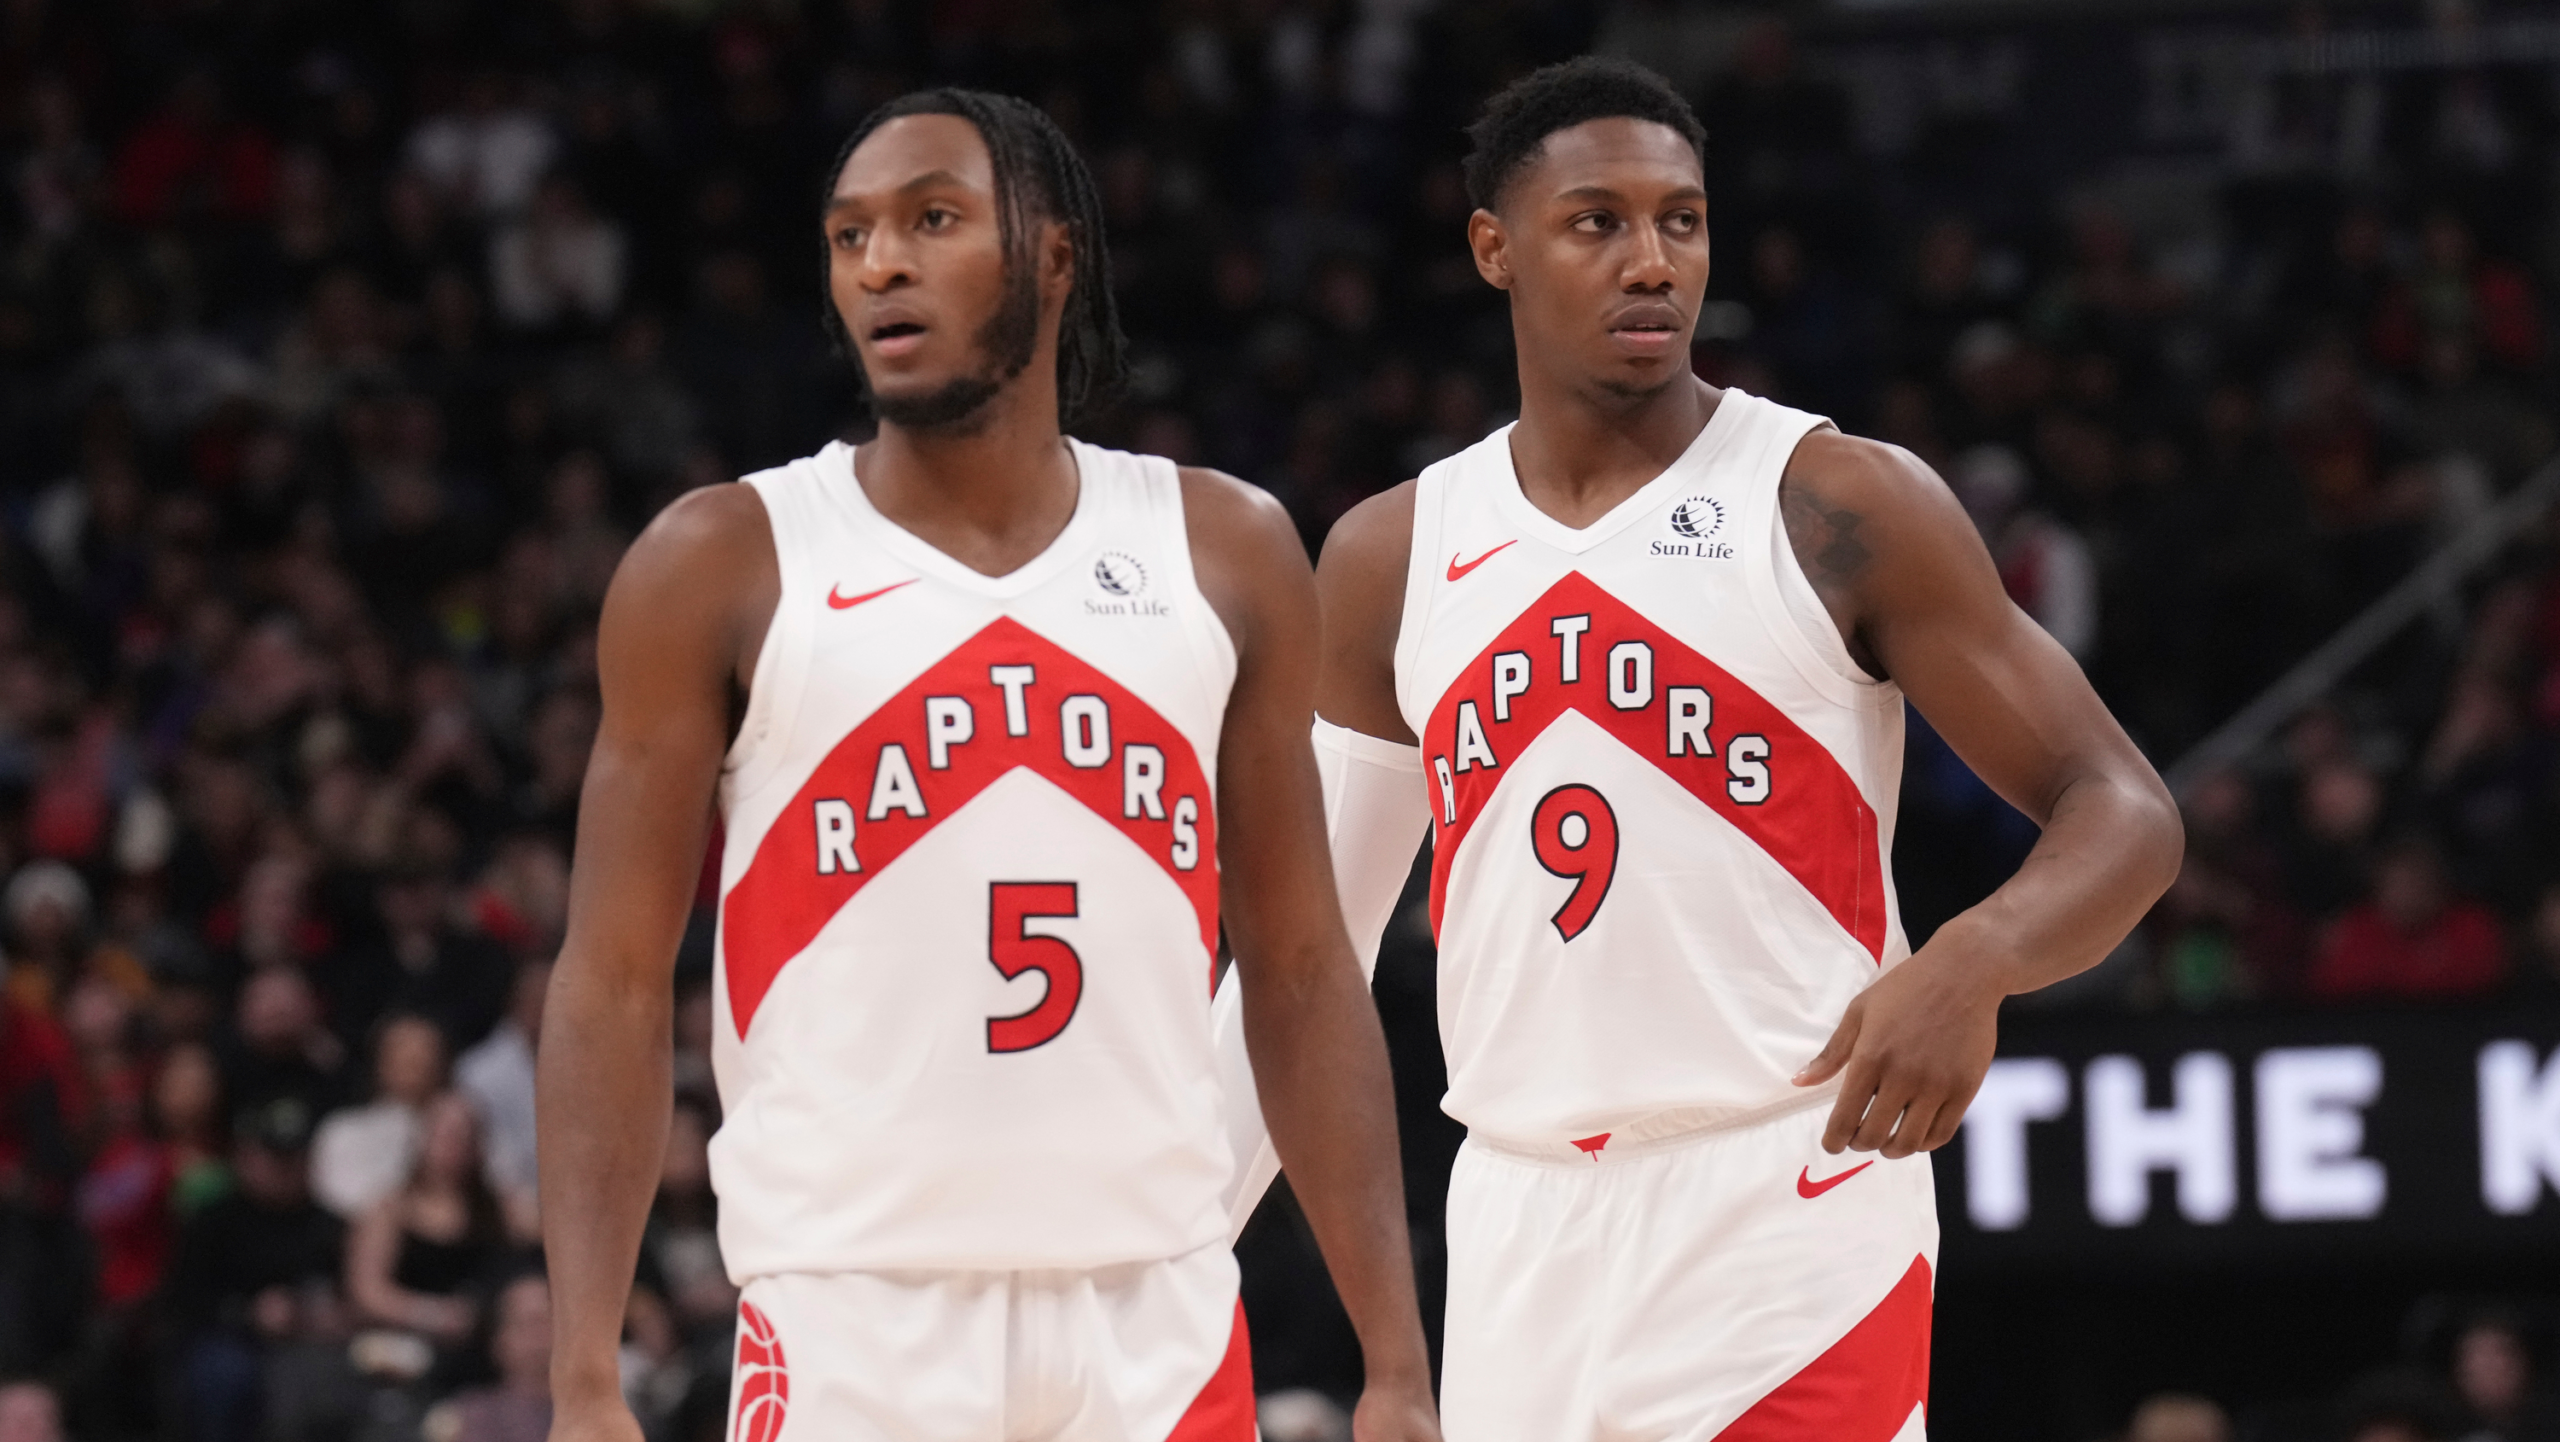 Immanuel Quickley and RJ Barrett, both still young and with bright futures, may end up proving the Raptors got the better end of the deal with the Knicks. (AP Photo/Chris Young)